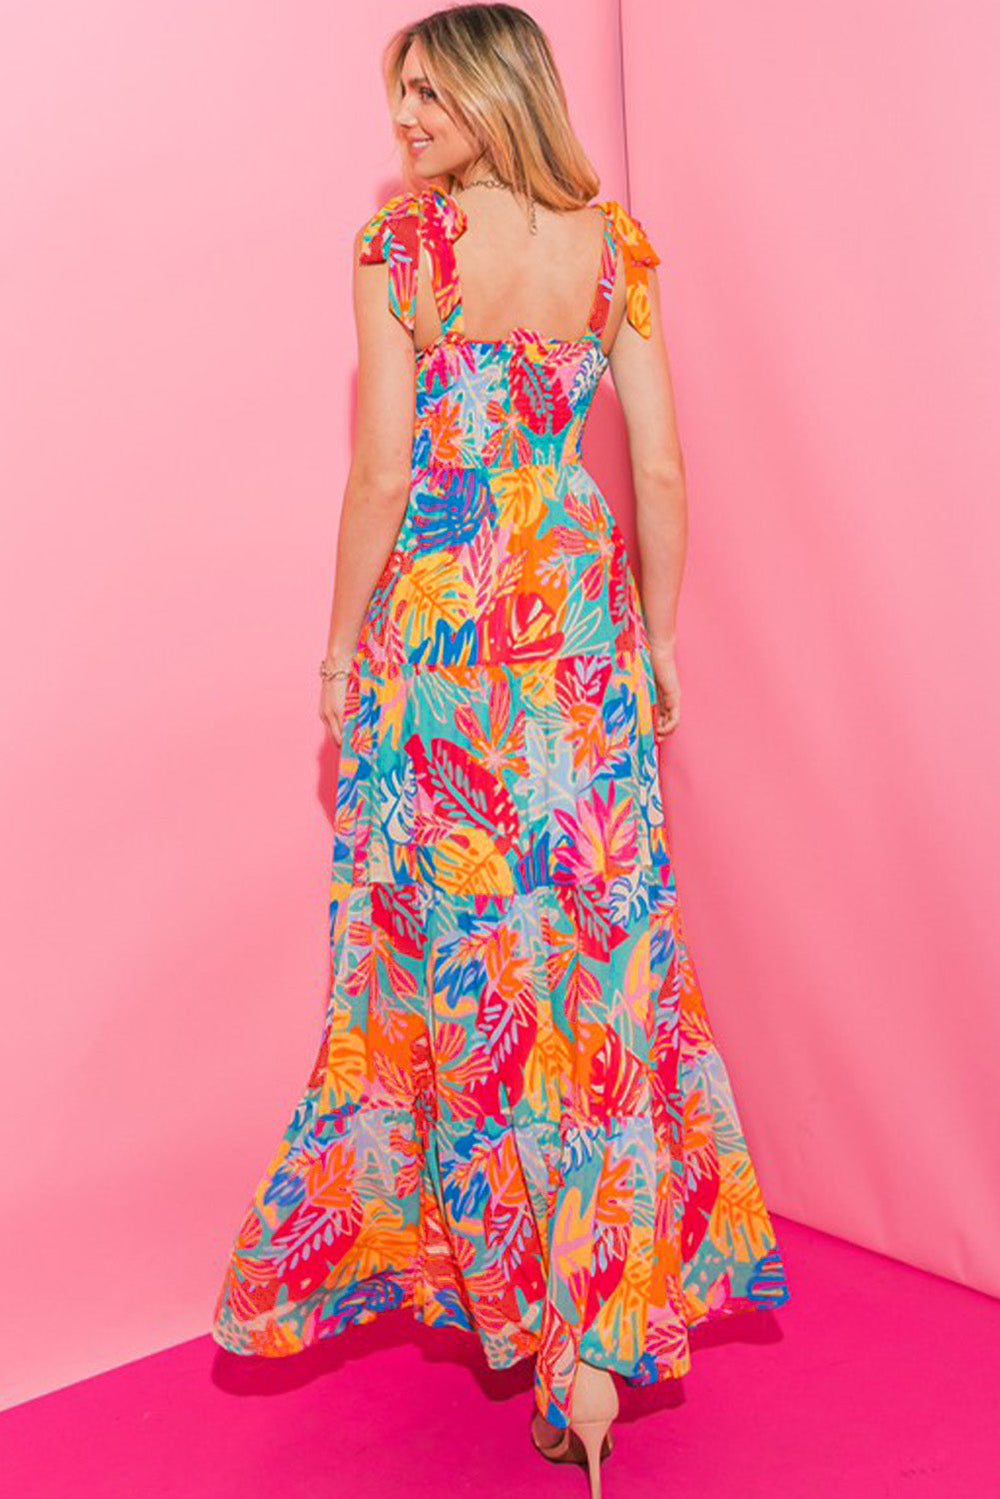 Multicolor Vibrant Tropical Print Smocked Ruffle Tiered Maxi Dress - Only Sizes S, XL Left Ti Amo I love you